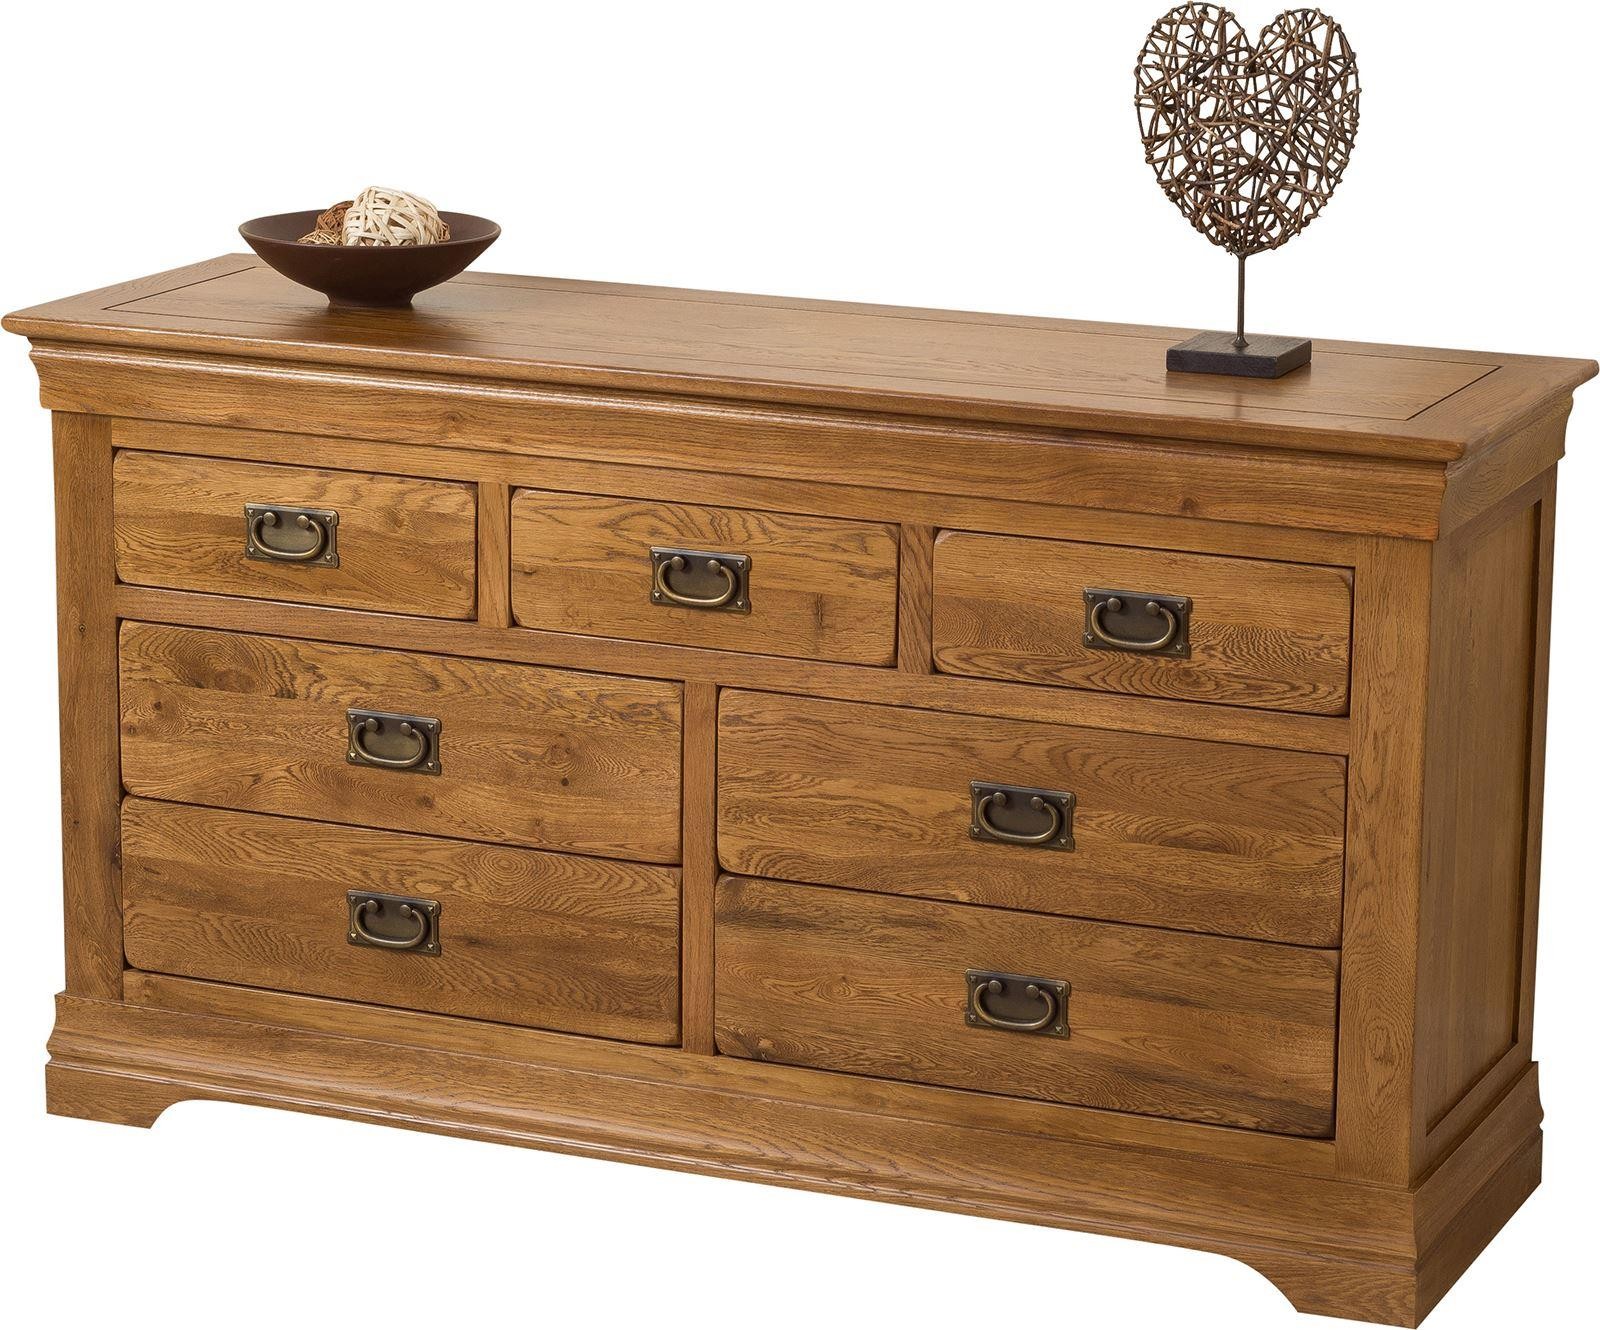 French Chateau Rustic Solid Oak Chest of Drawers [3+4 drawer]